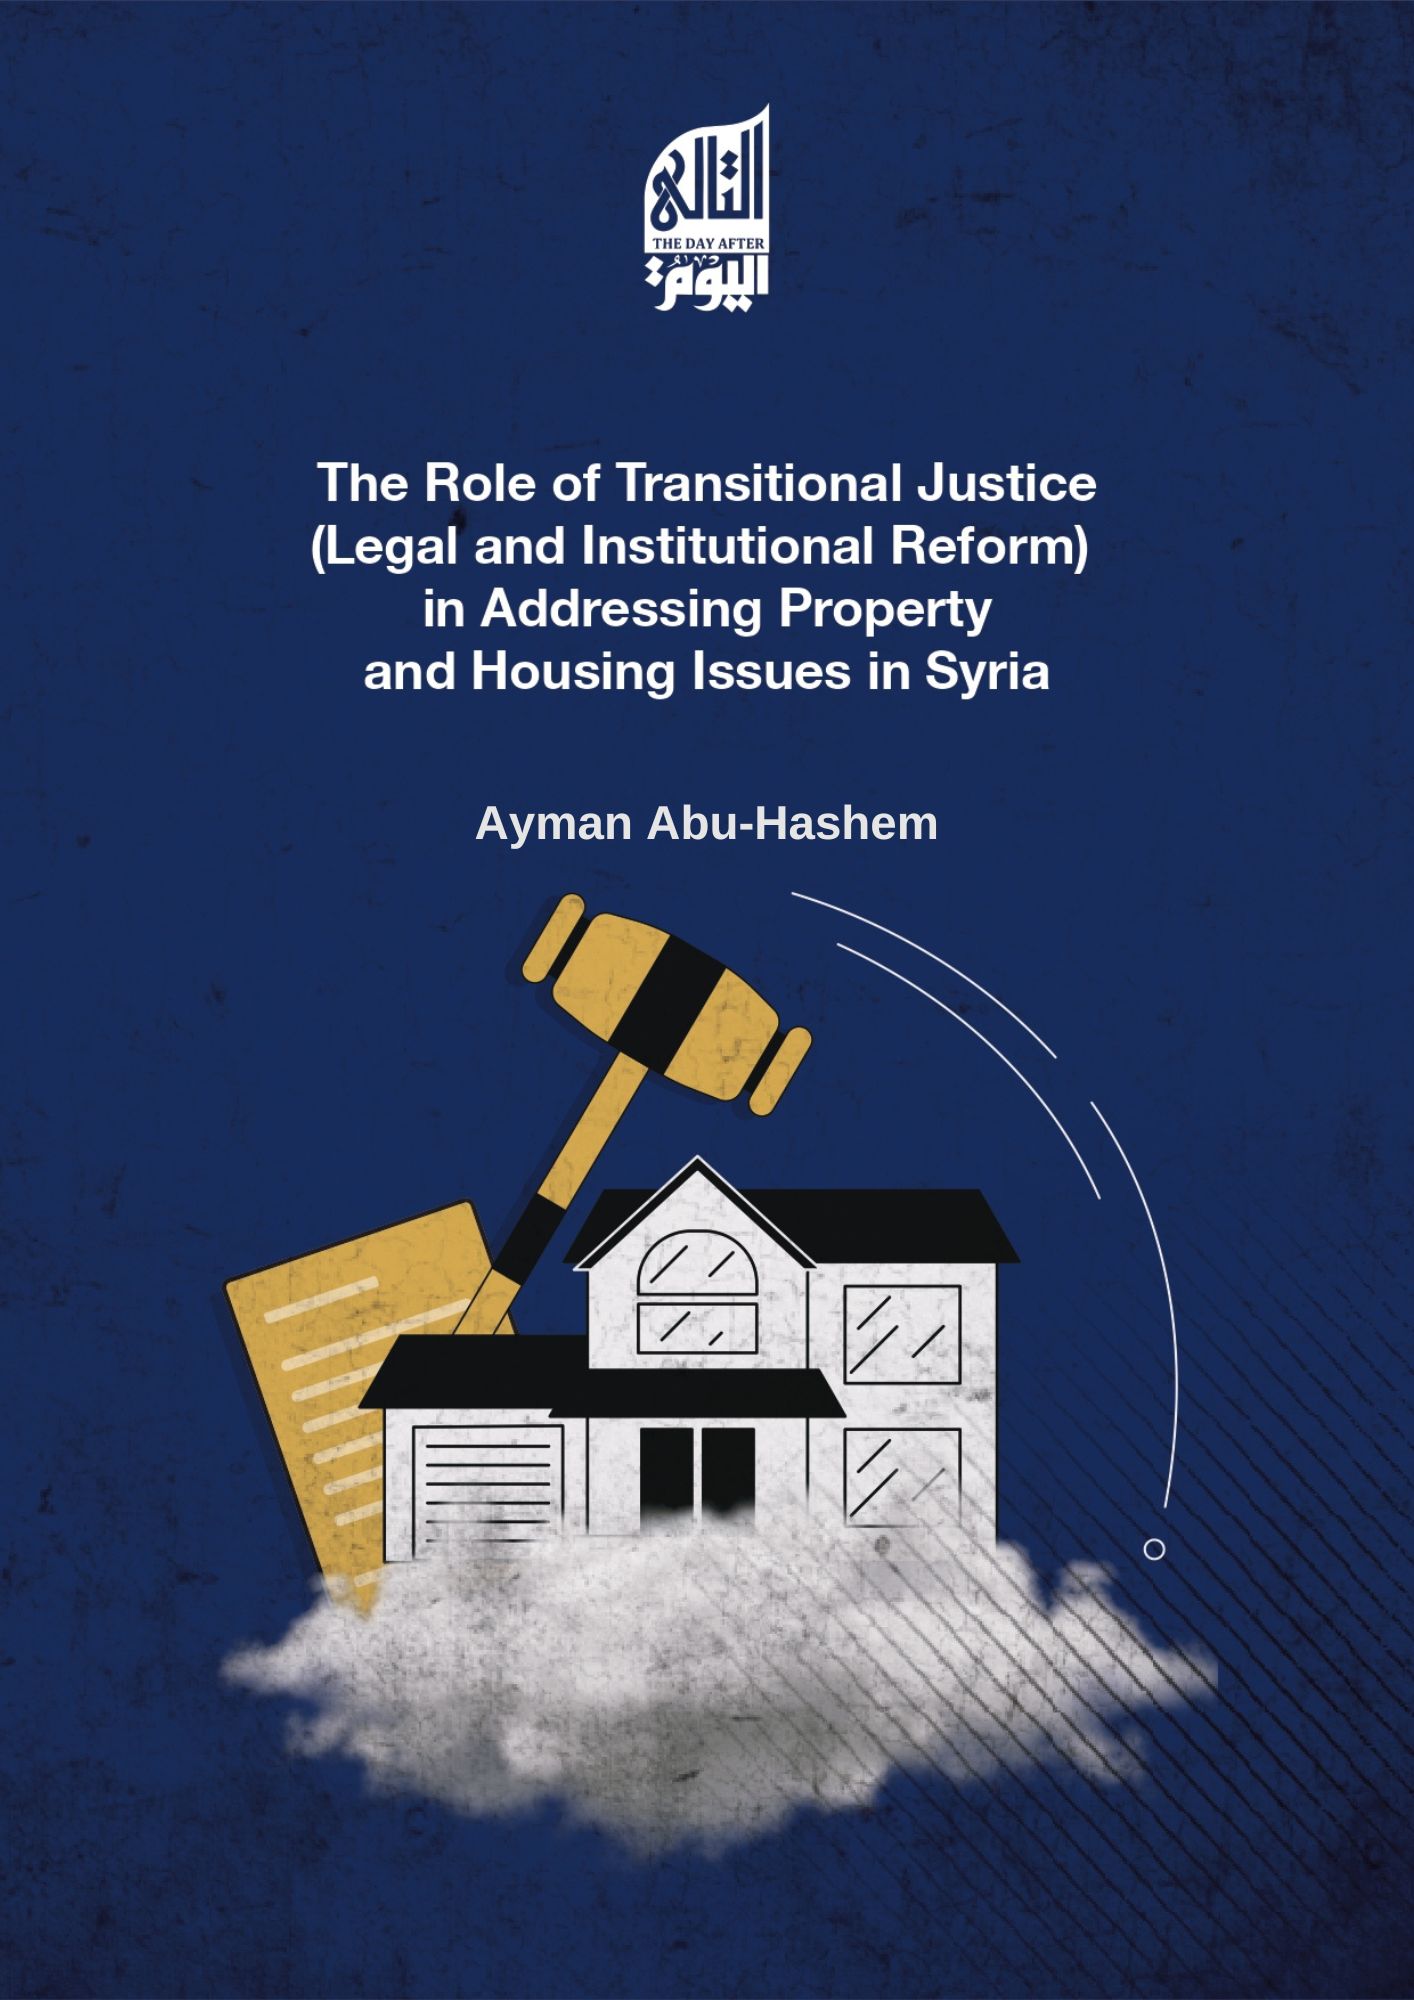 The Role of Transitional Justice (Legal and Institutional Reform) in Addressing Property and Housing Issues in Syria